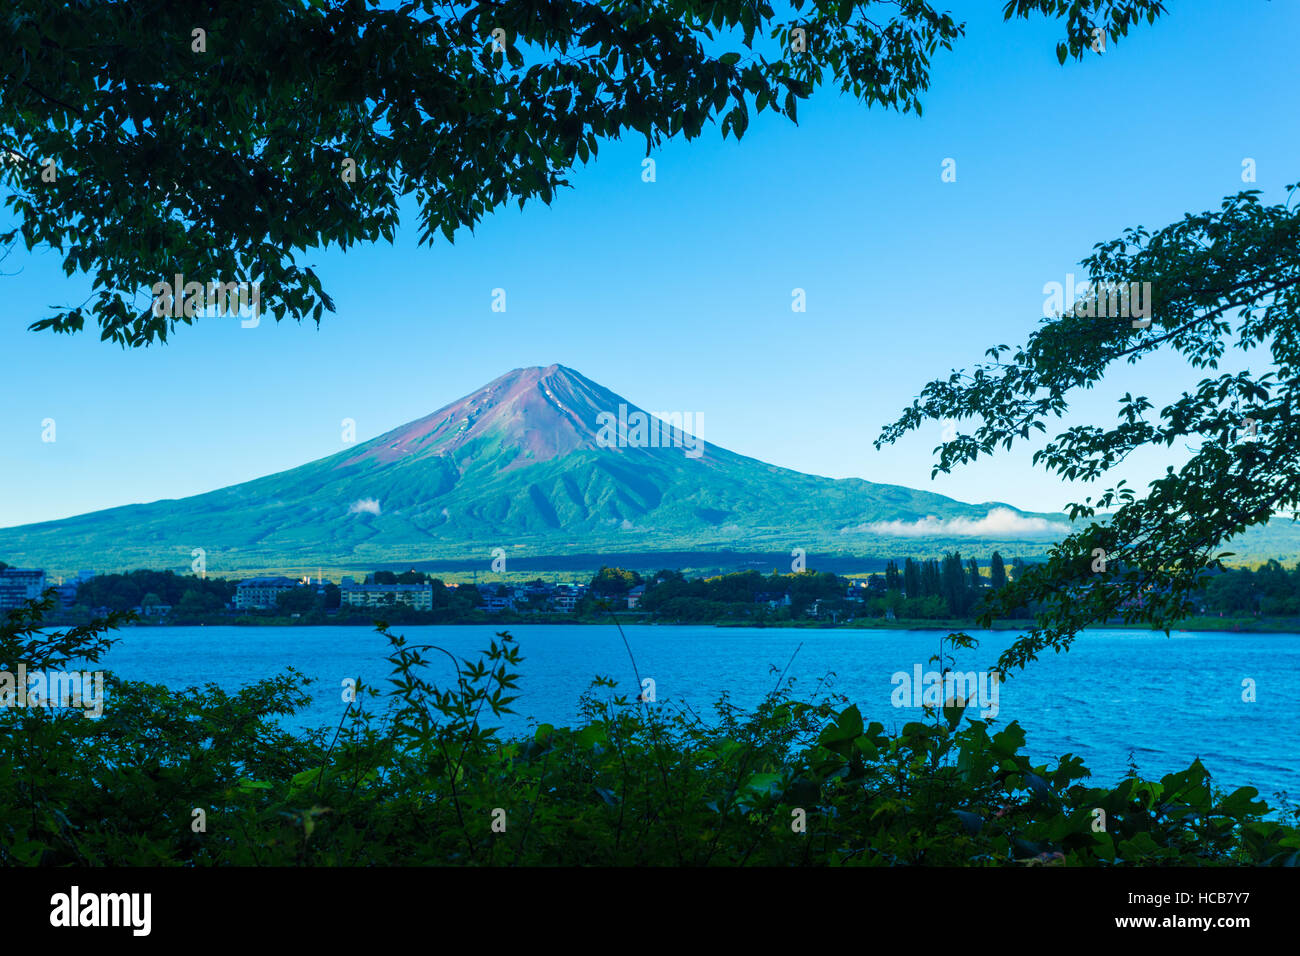 Foreground trees frame a snowless dirt volcanic cone of Mount Fuji above Kawaguchiko Lake during early summer morning in Japan Stock Photo